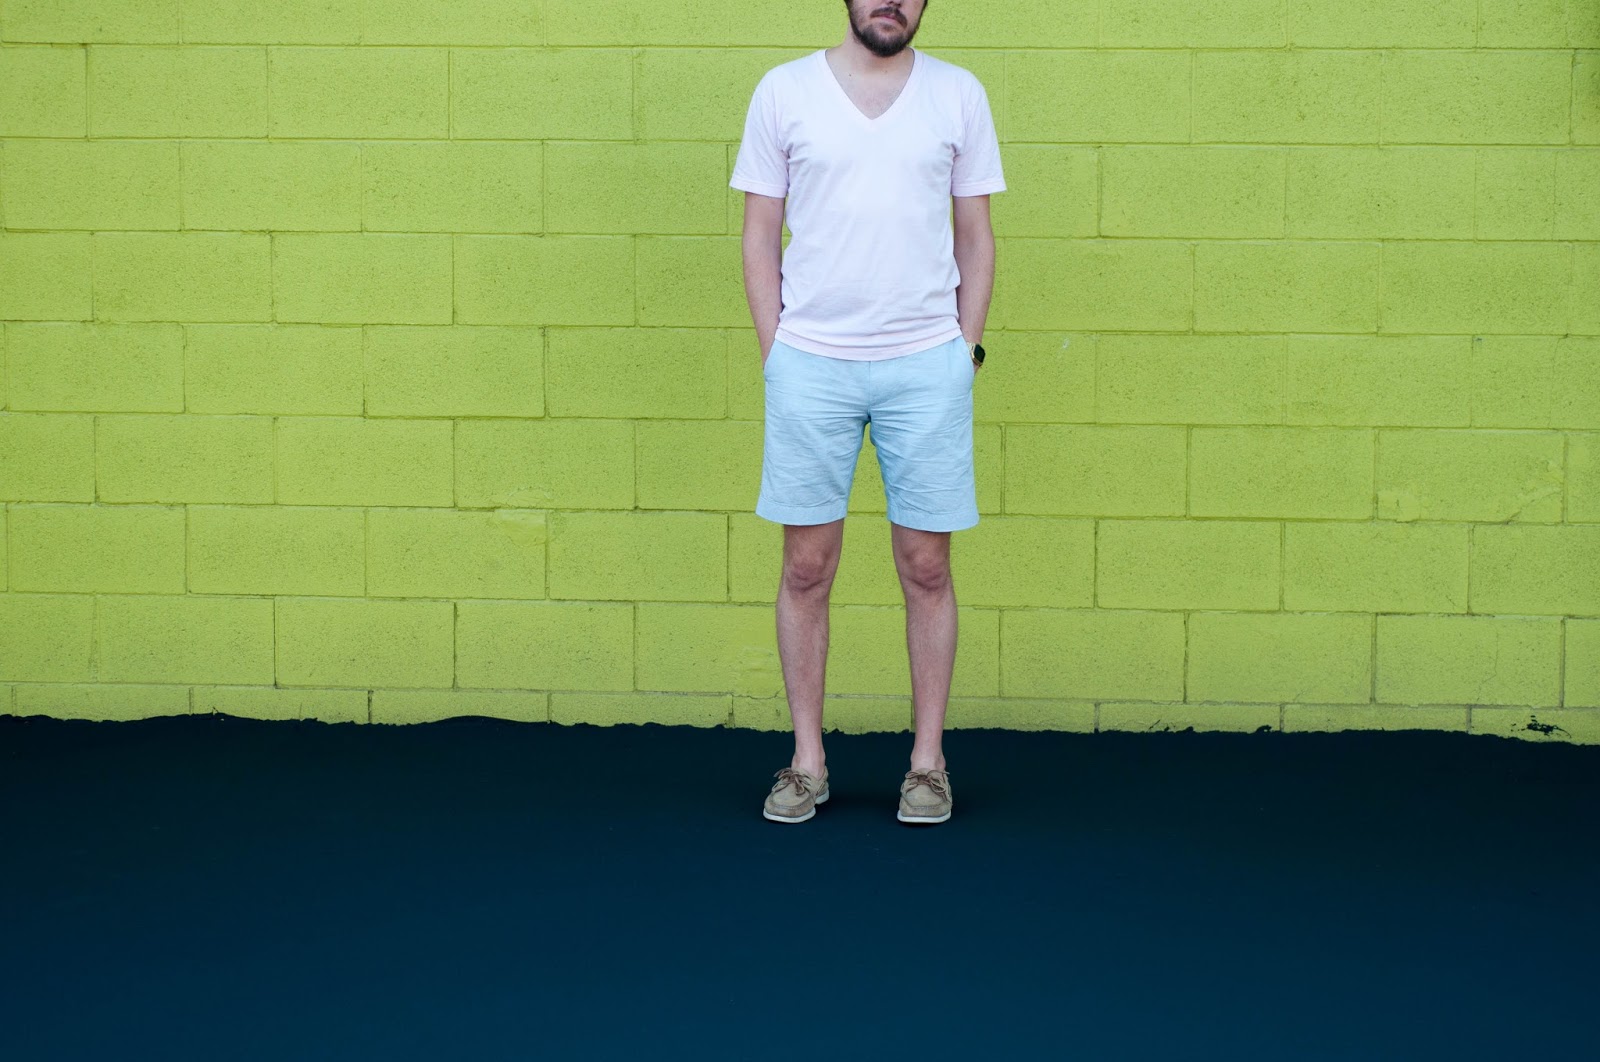 jcrew stanton shorts, american apparel v neck, sperry topsider, boat shoes, ootd, mens fashion